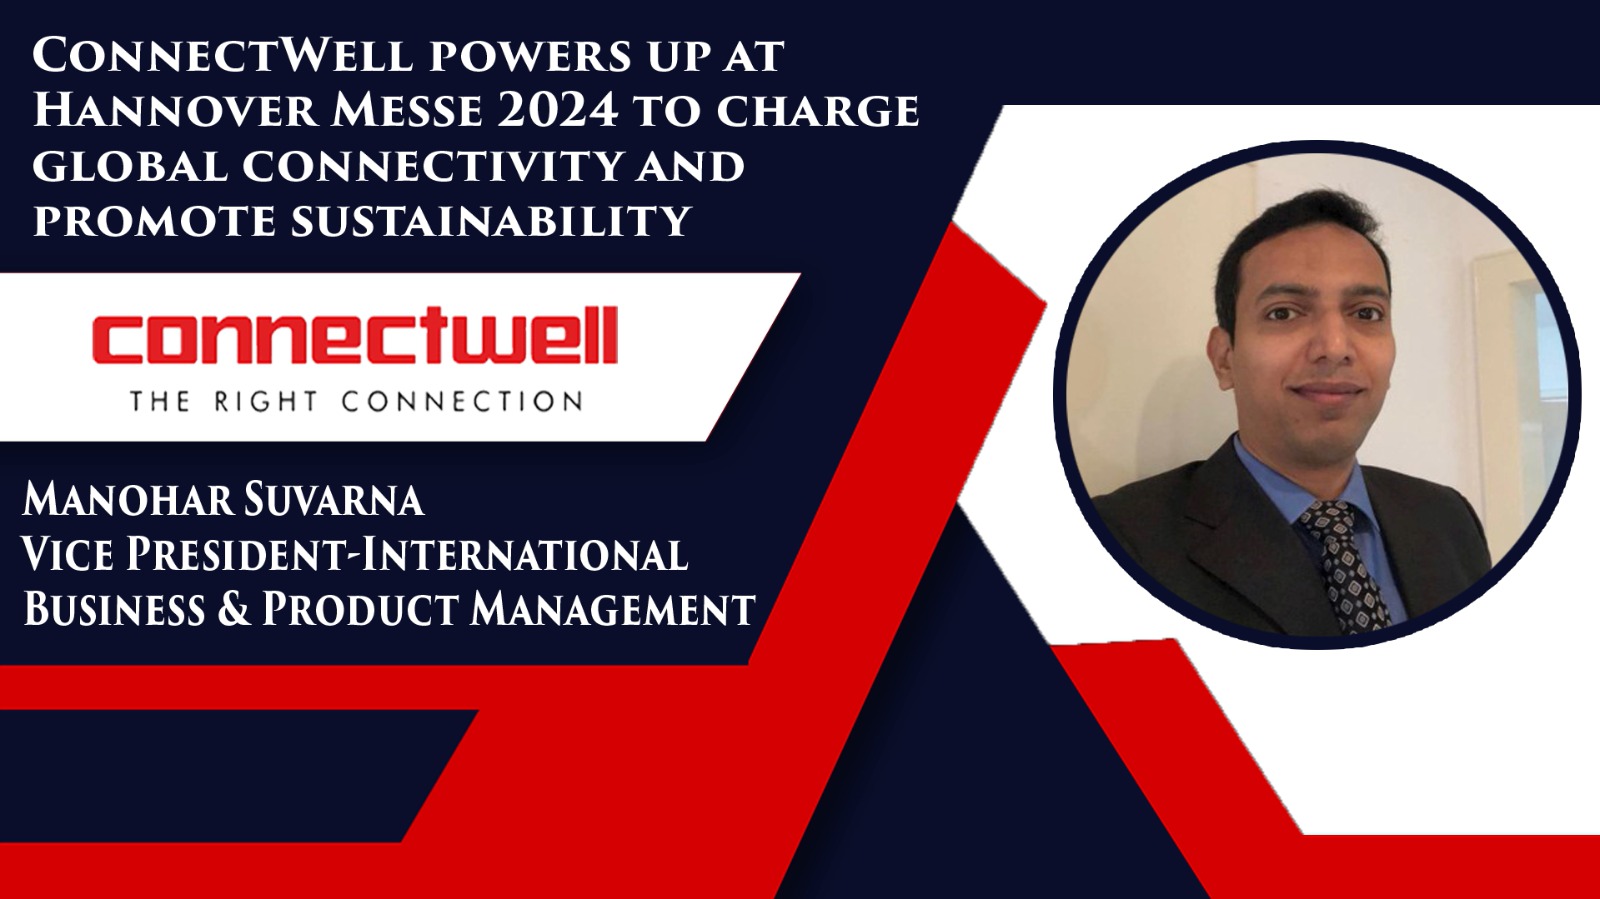 ConnectWell power up at Hannover Messe 2024 to charge global connectivity and promote sustainability